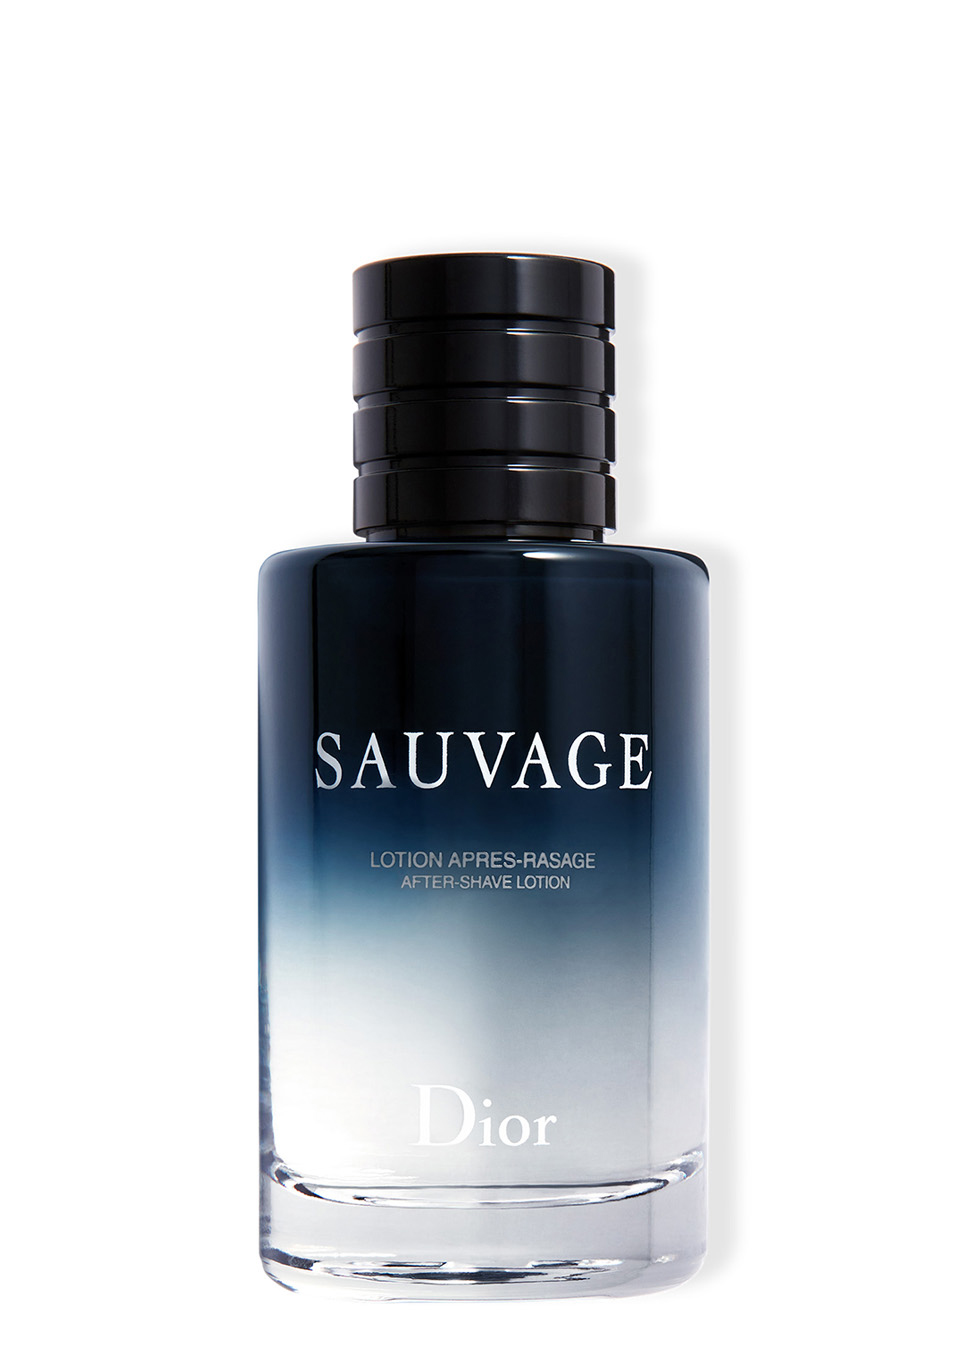 Dior Sauvage After-Shave Lotion 100ml 